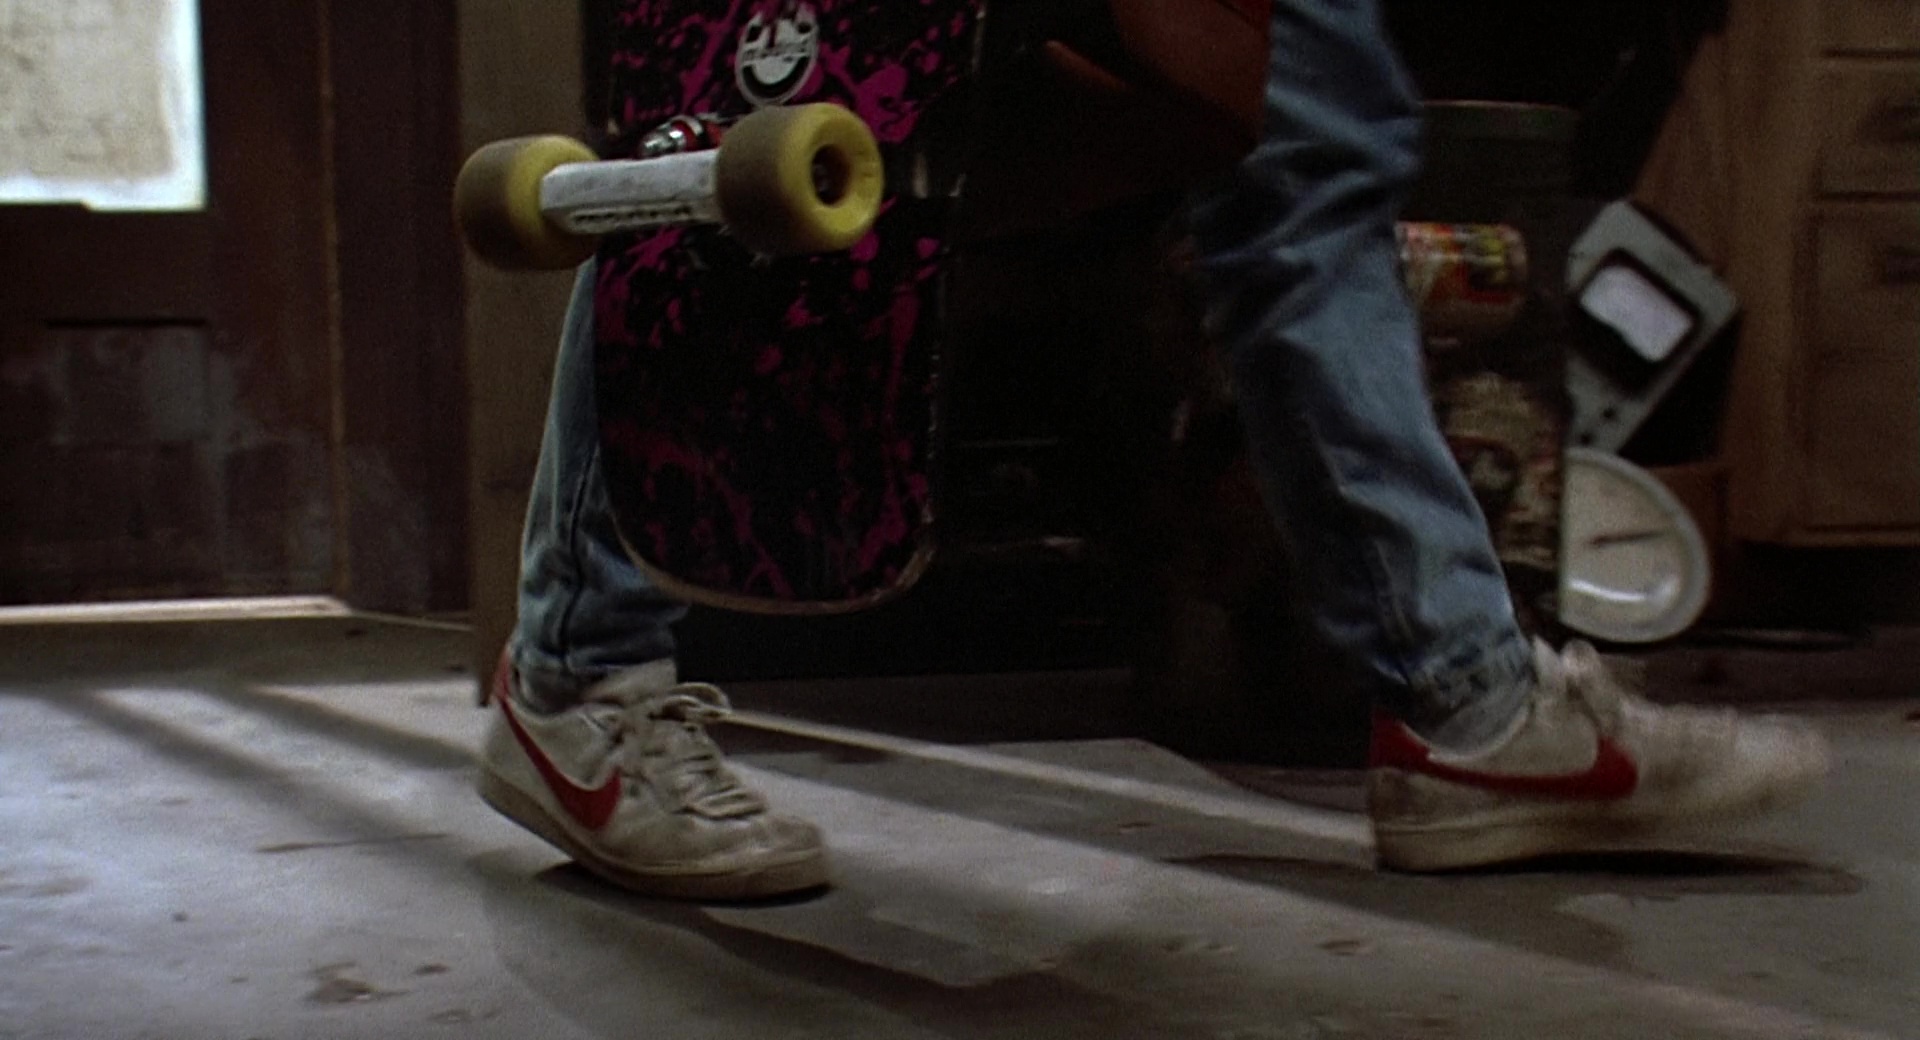 nike 1985 marty mcfly shoes